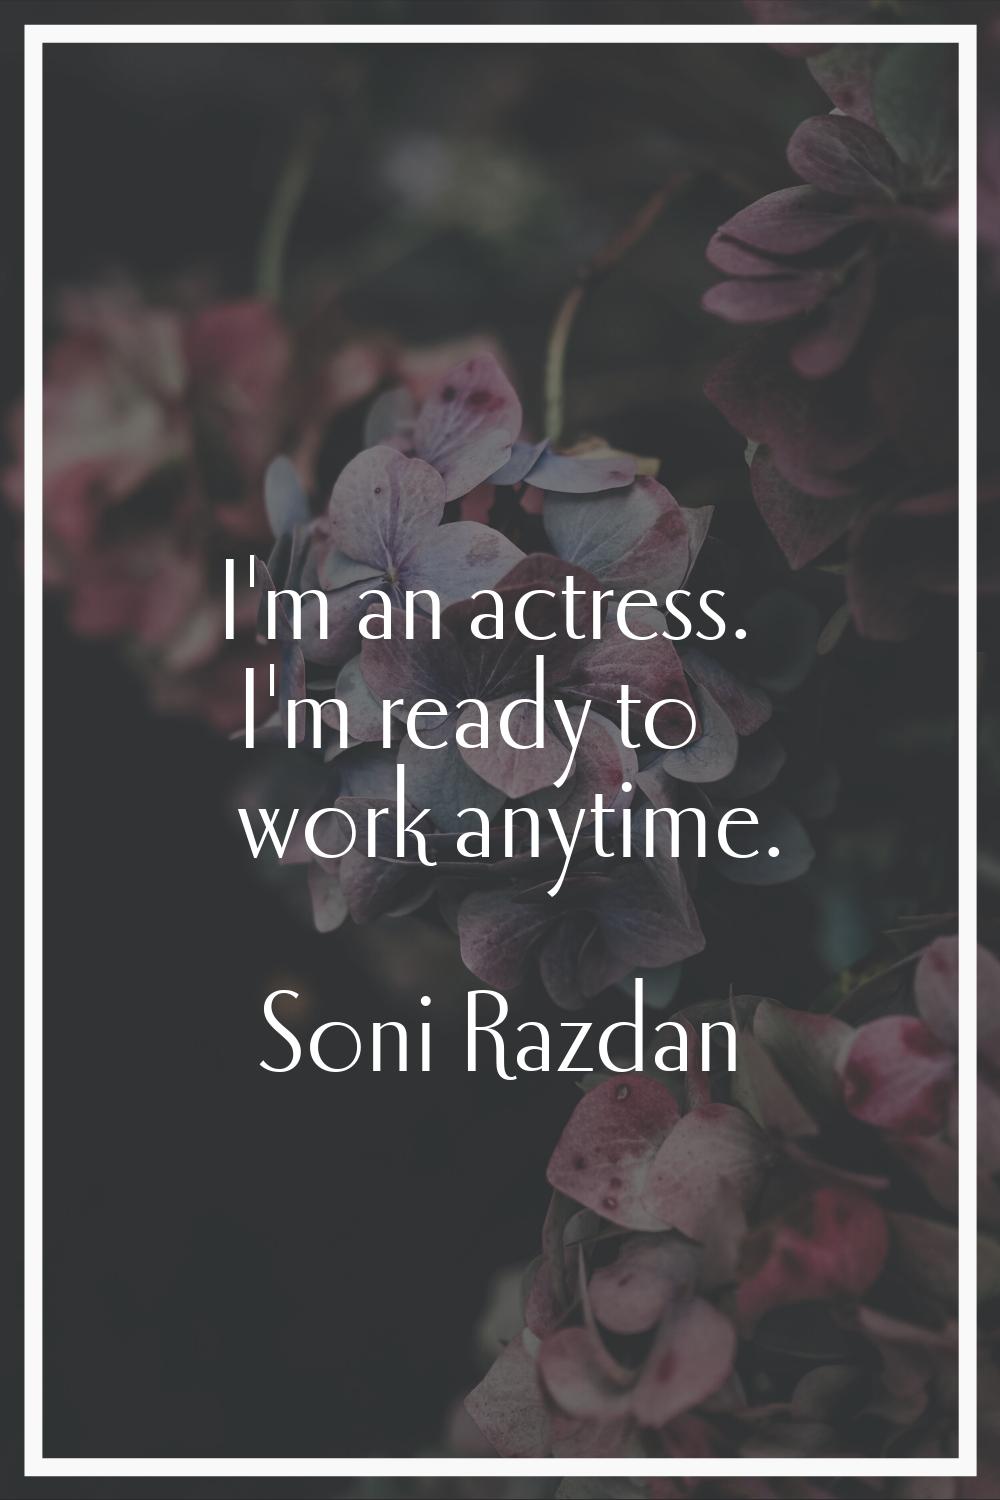 I'm an actress. I'm ready to work anytime.